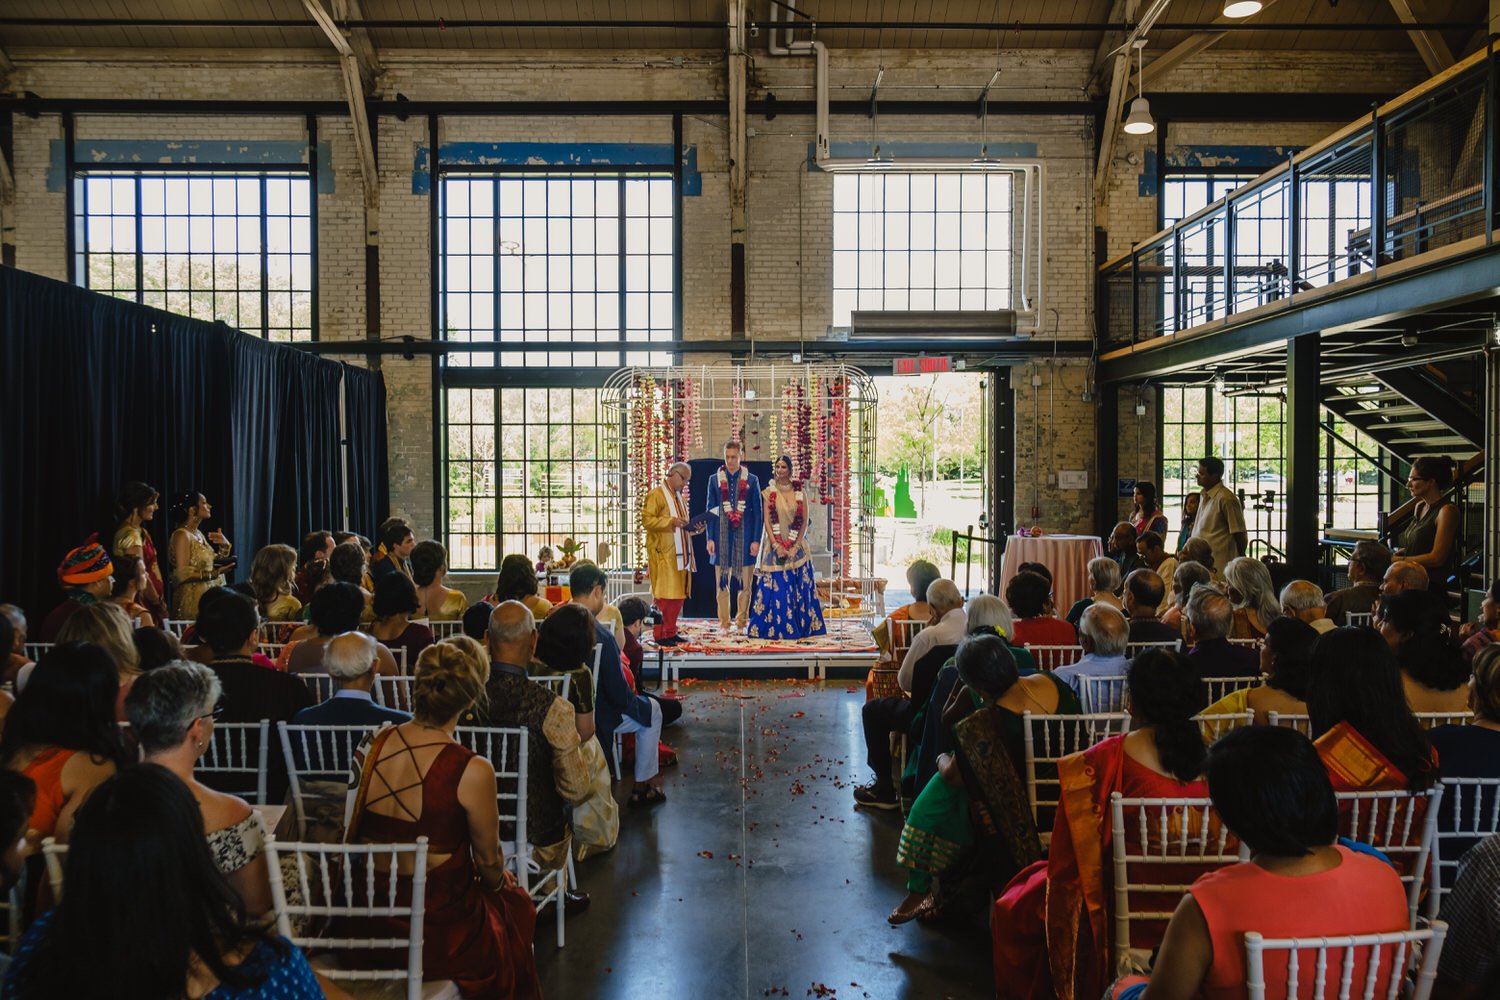 indian wedding ceremony at the horticulture building at Landsdowne park in ottawa